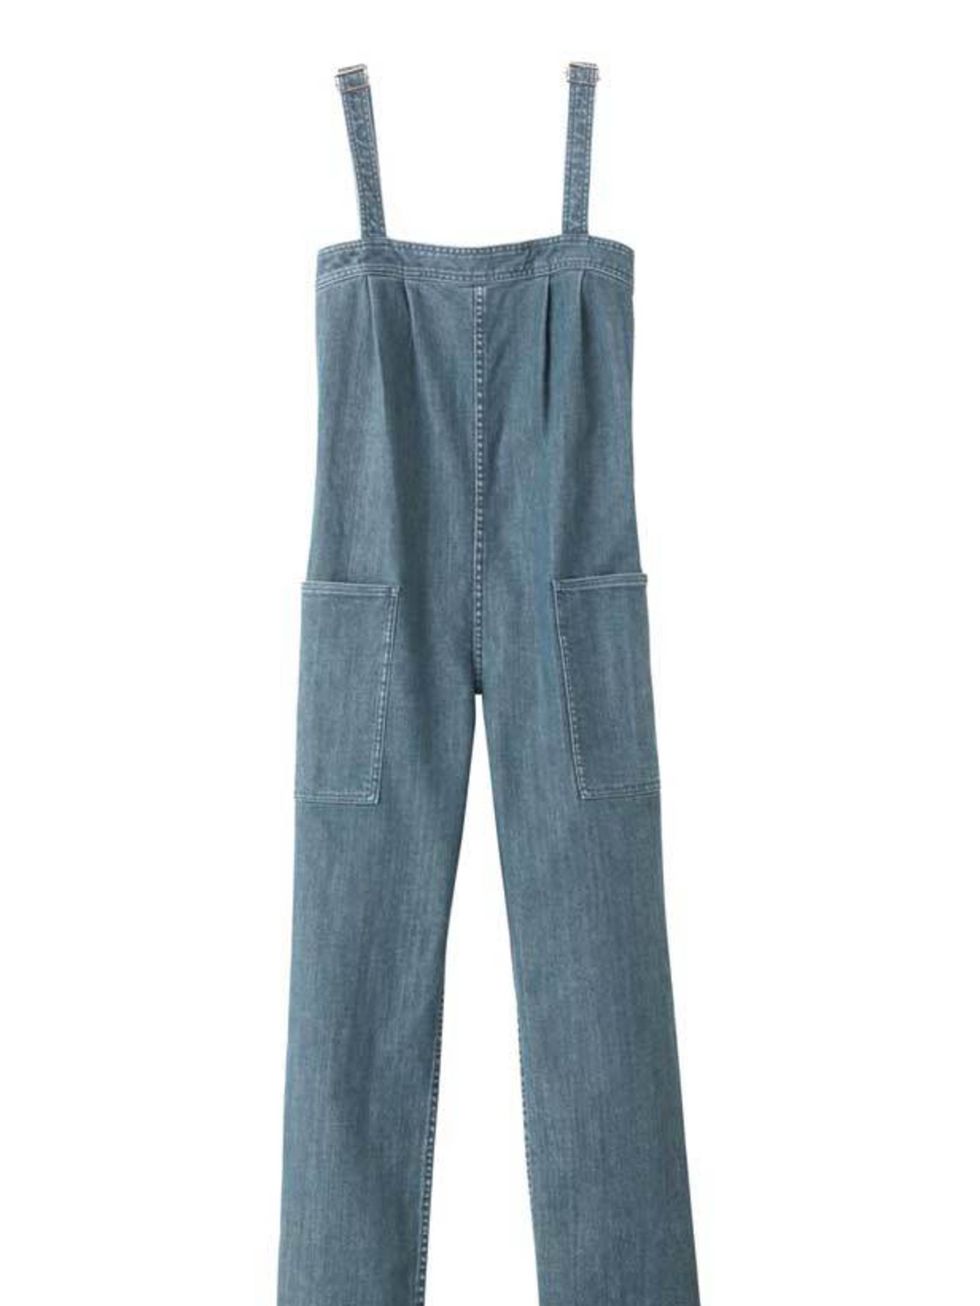 <p>APC full-length dungarees, £200, for stocksts call 0207 729 7727</p>